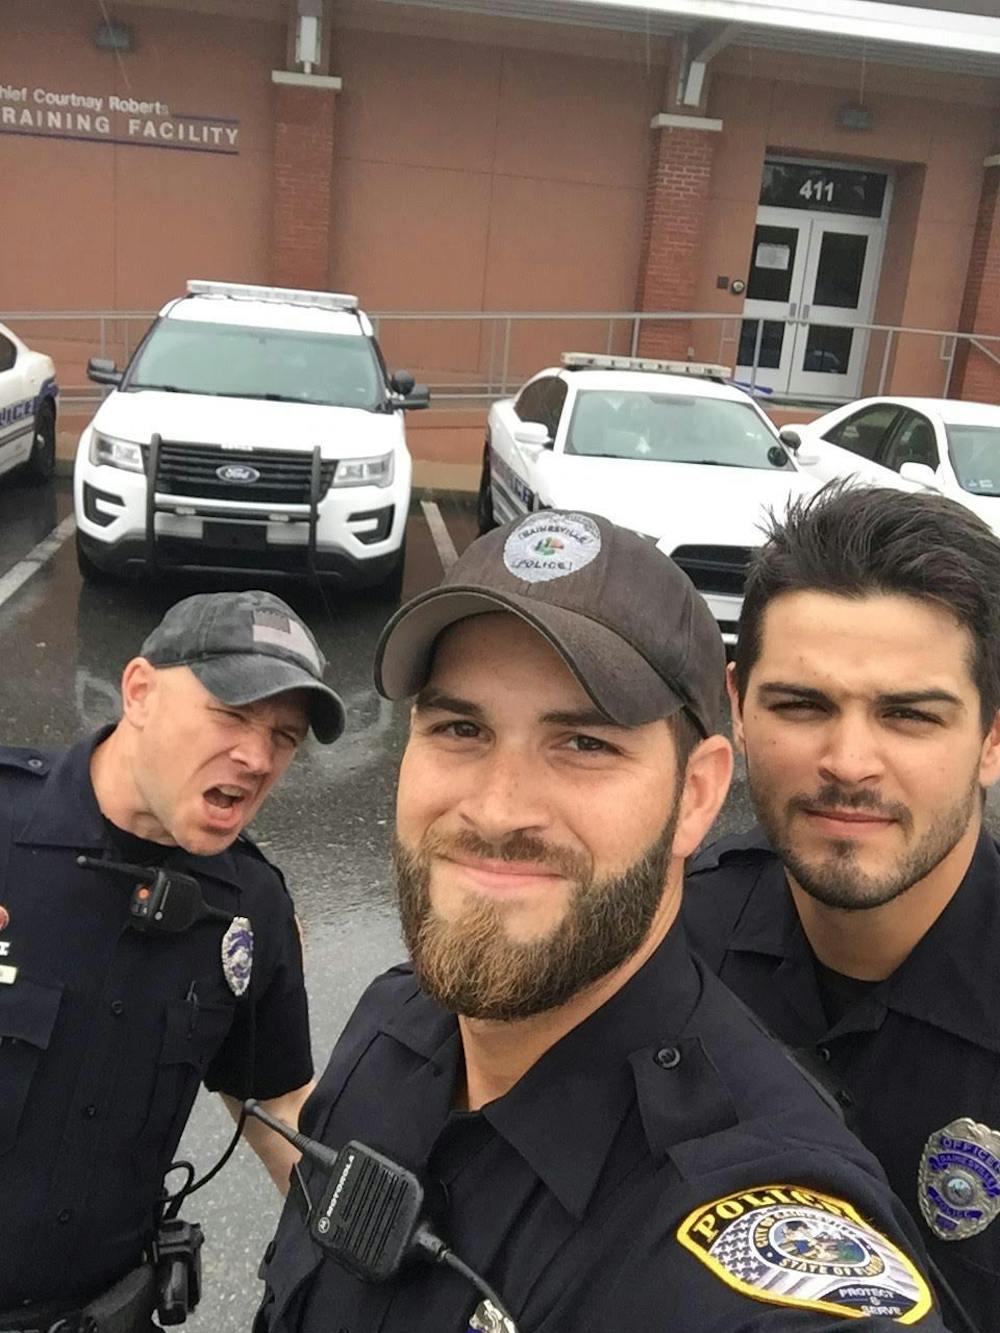 <p>SWAT Officer Daniel Rengering, right, will report live from the Grammys for PopWrapped TV. Rengering said he will also be a host at the Screen Actors Guild Awards on Jan. 27 and will be a guest speaker at the 91st Annual Rudolph Valentino Memorial in August.</p>